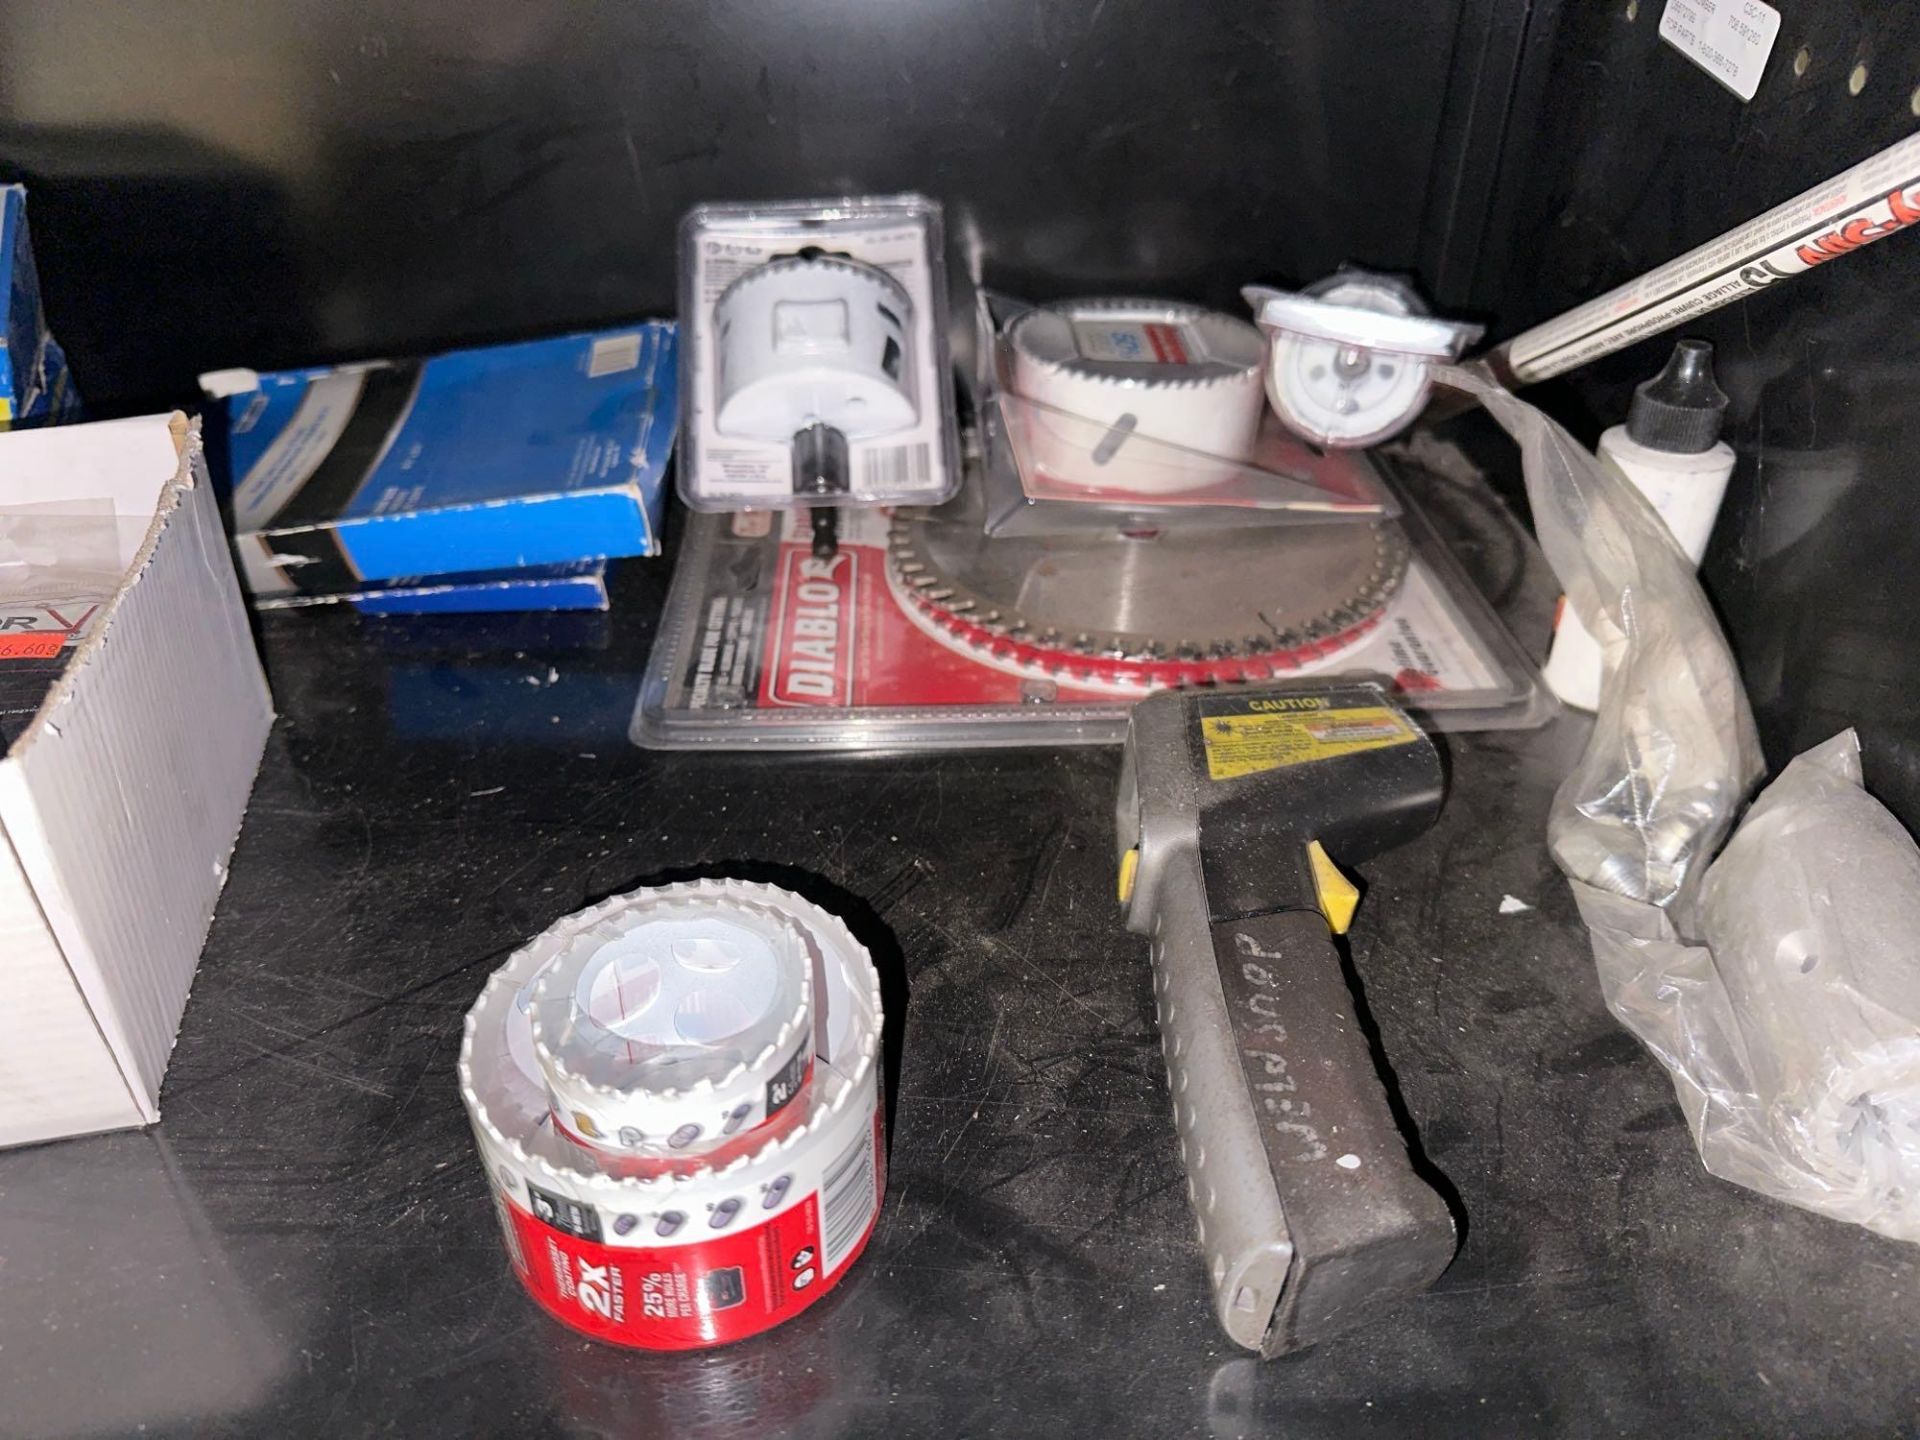 Craftsman Professional Cabinet w/ Tungsten Electrodes, Wire Brushes, Saw Blades and Misc Items - Image 5 of 6